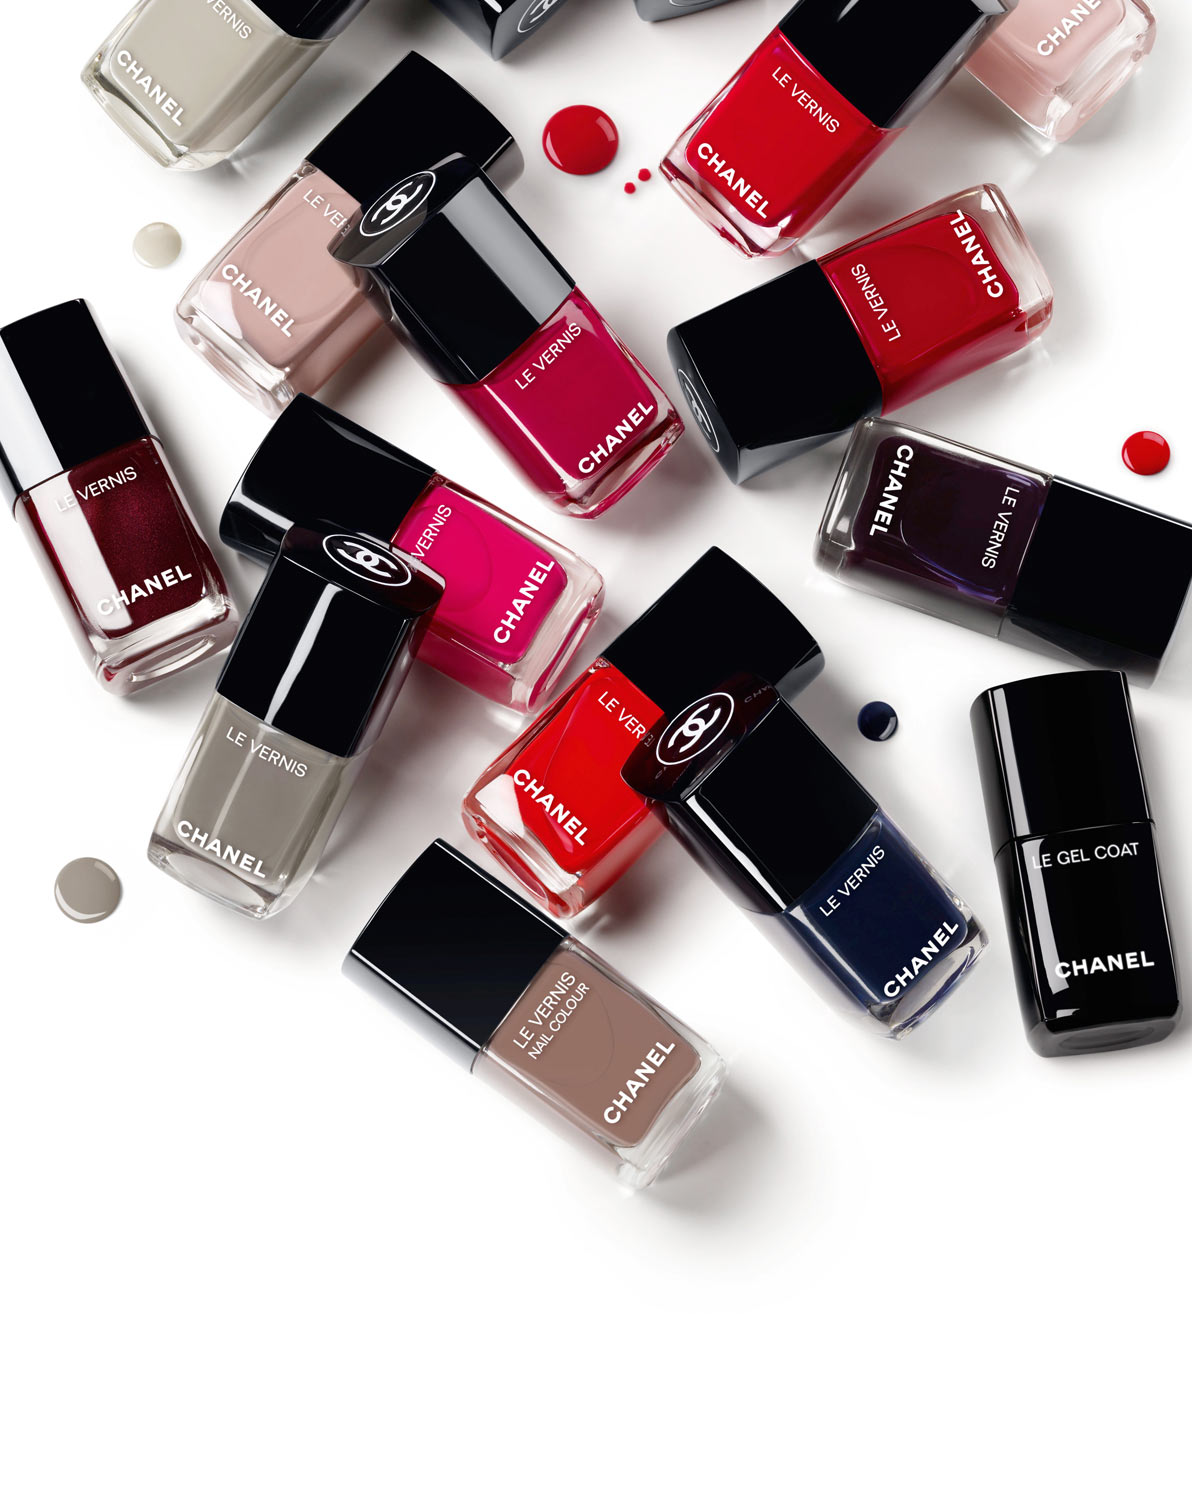 12 Best Long-Lasting Nail Polishes for a Flawless Manicure